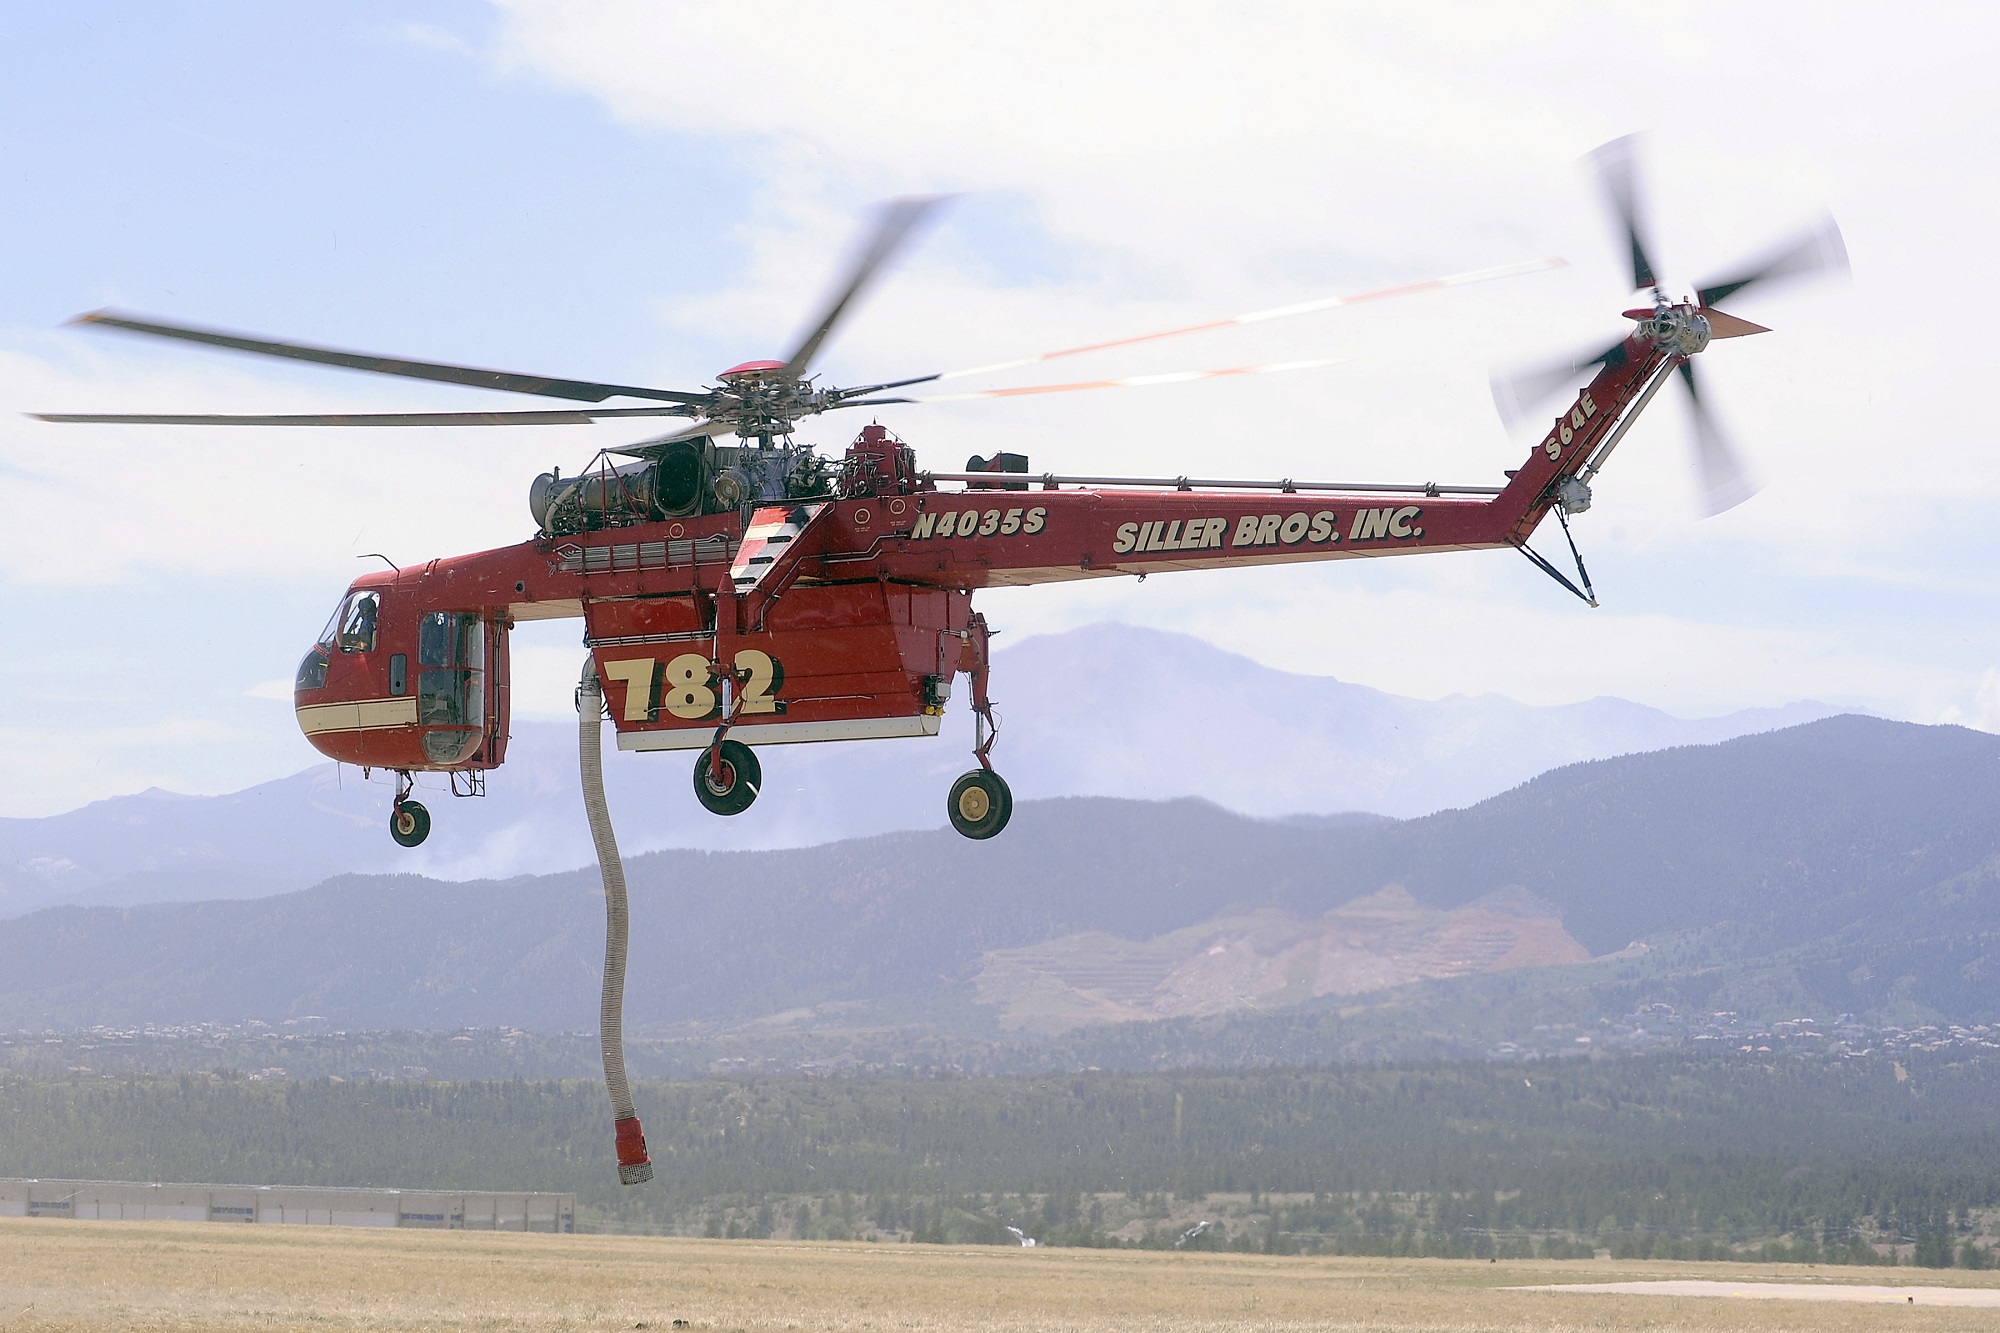 Helicopter Fire Fighting